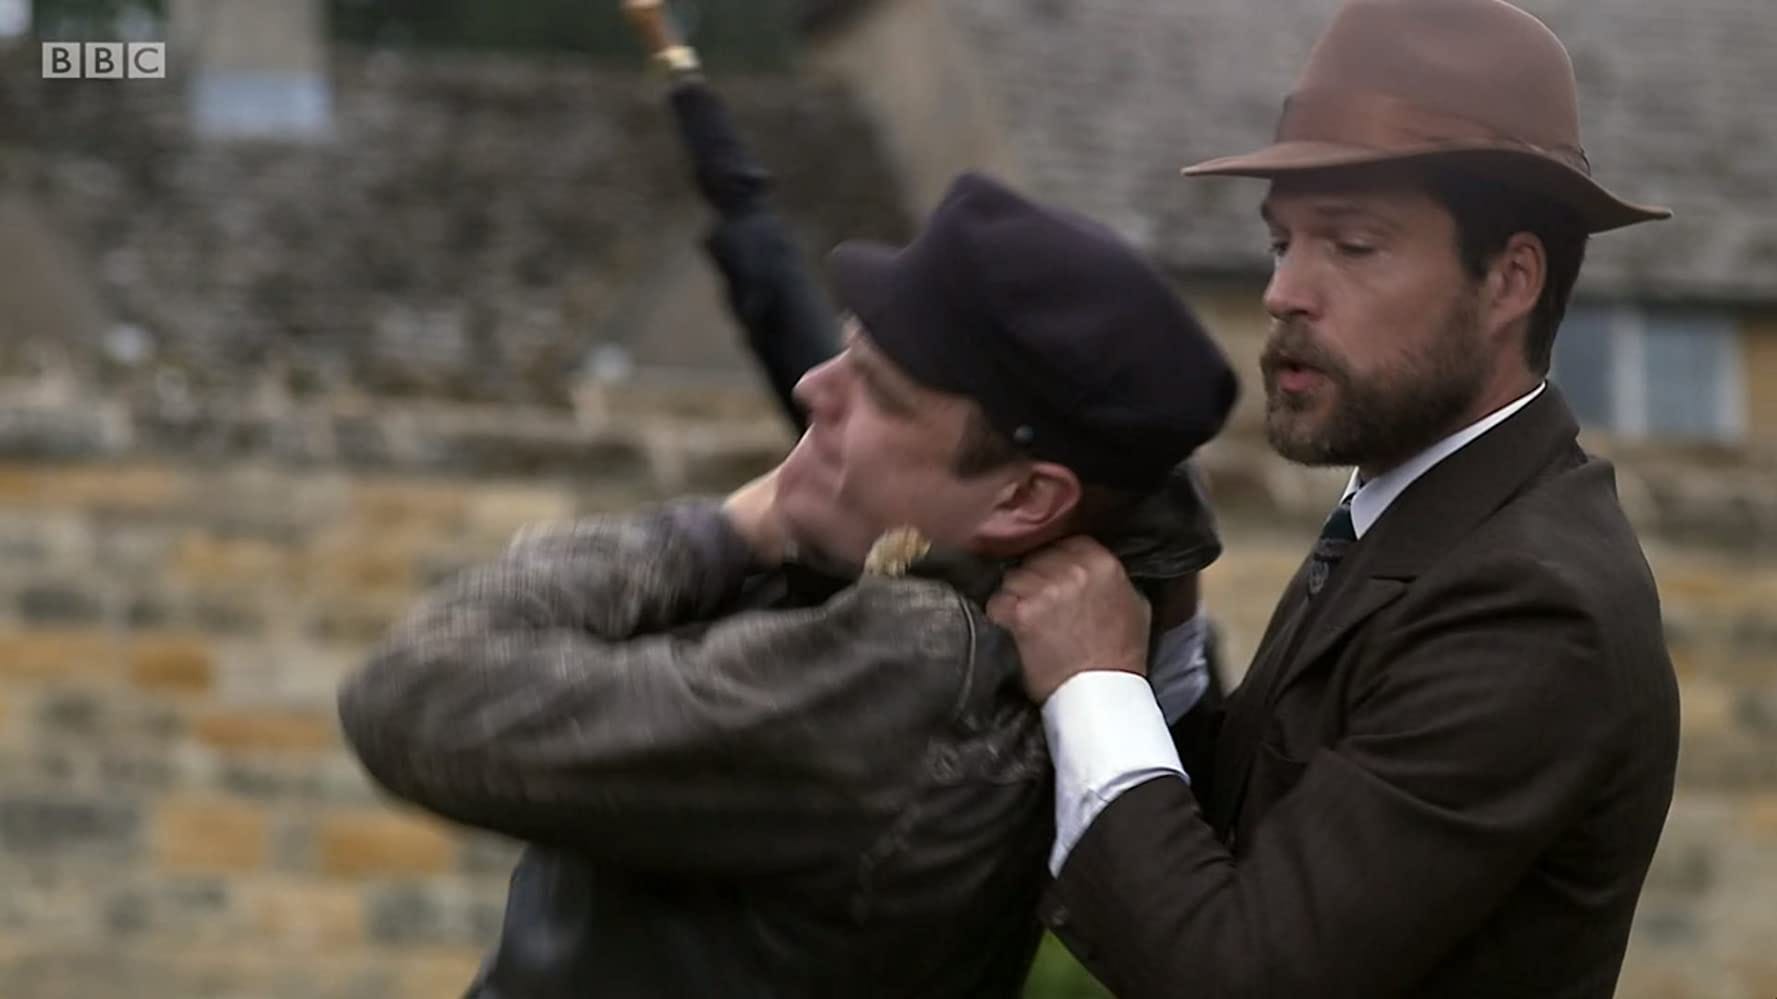 Father Brown': S02.E05. “The Mysteries of the Rosary”, by Shain E. Thomas, Father Brown